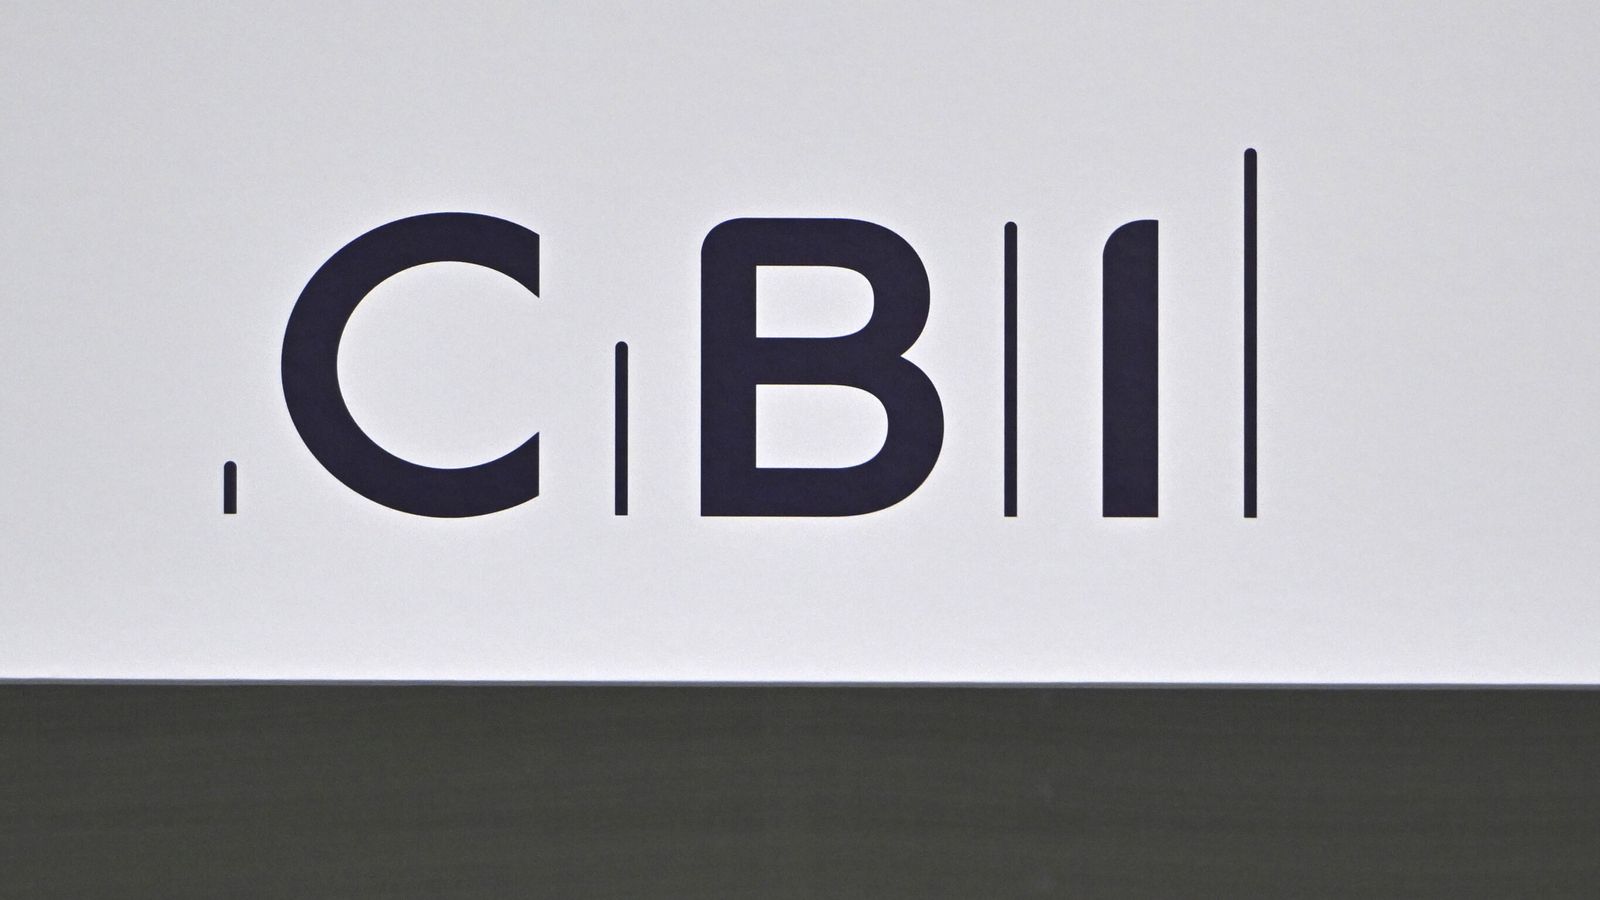 CBI to close swathe of overseas offices in cost-cutting drive